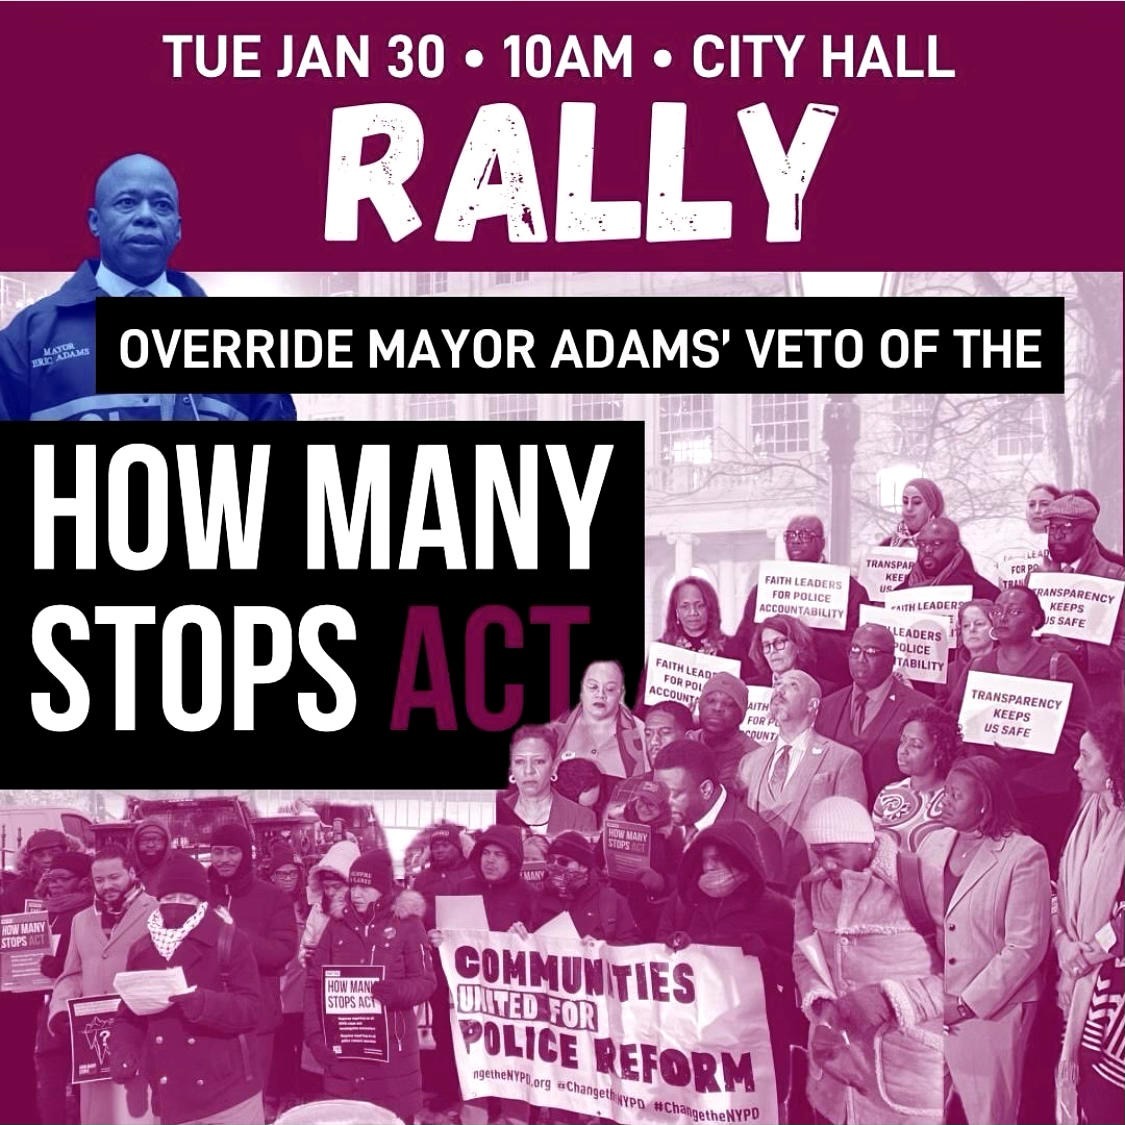 ICYMI: @NYCMayor is pressuring @NYCCouncil to flip on 2 bills he's vetoed: #HowManyStopsAct, requiring NYPD to report on L1 stops, & #HALTsolitary, ending solitary in NYC jails. Pack City Hall TODAY (btwn 10AM-2 PM) so @NYCCouncil feels the pressure/support to override vetoes!